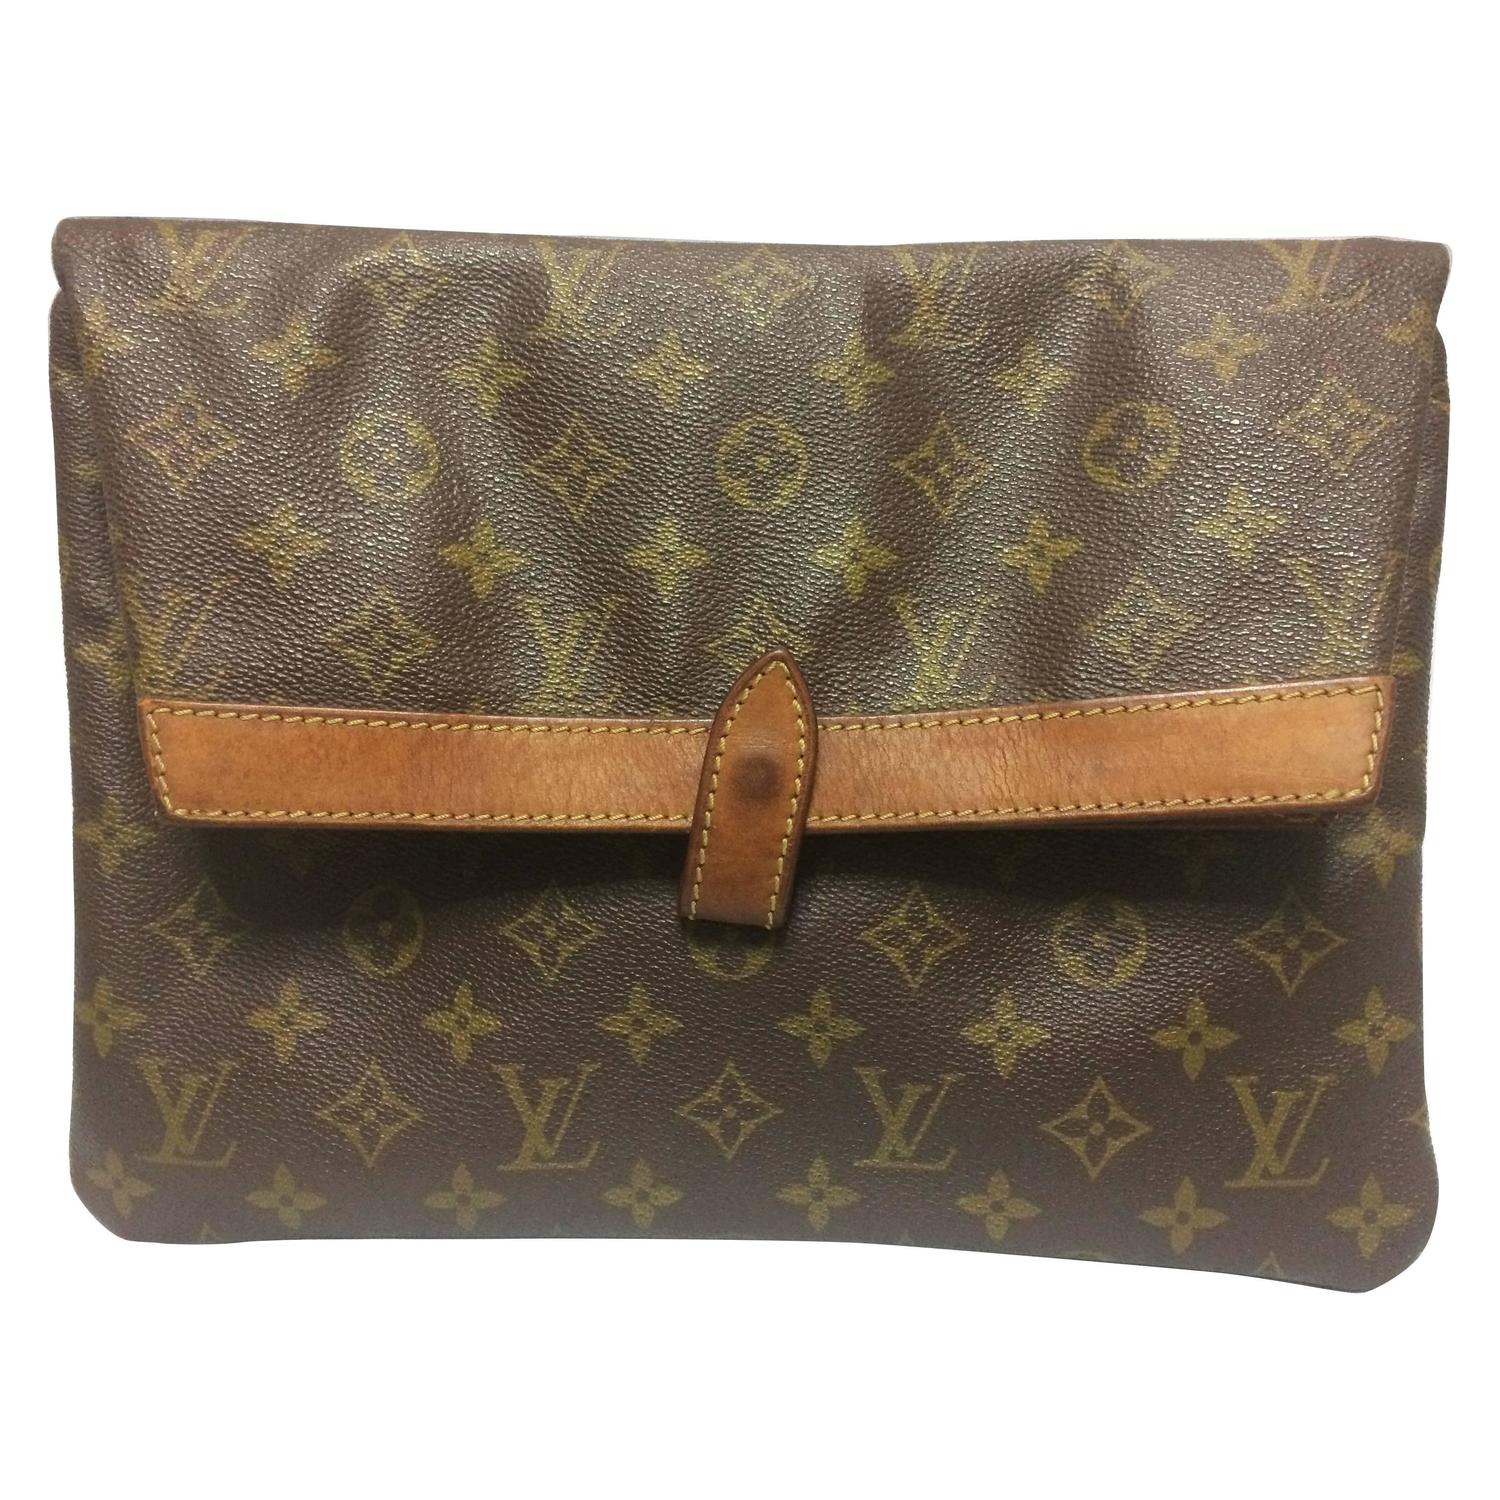 Classic Louis Vuitton Handbag Styles | Confederated Tribes of the Umatilla Indian Reservation